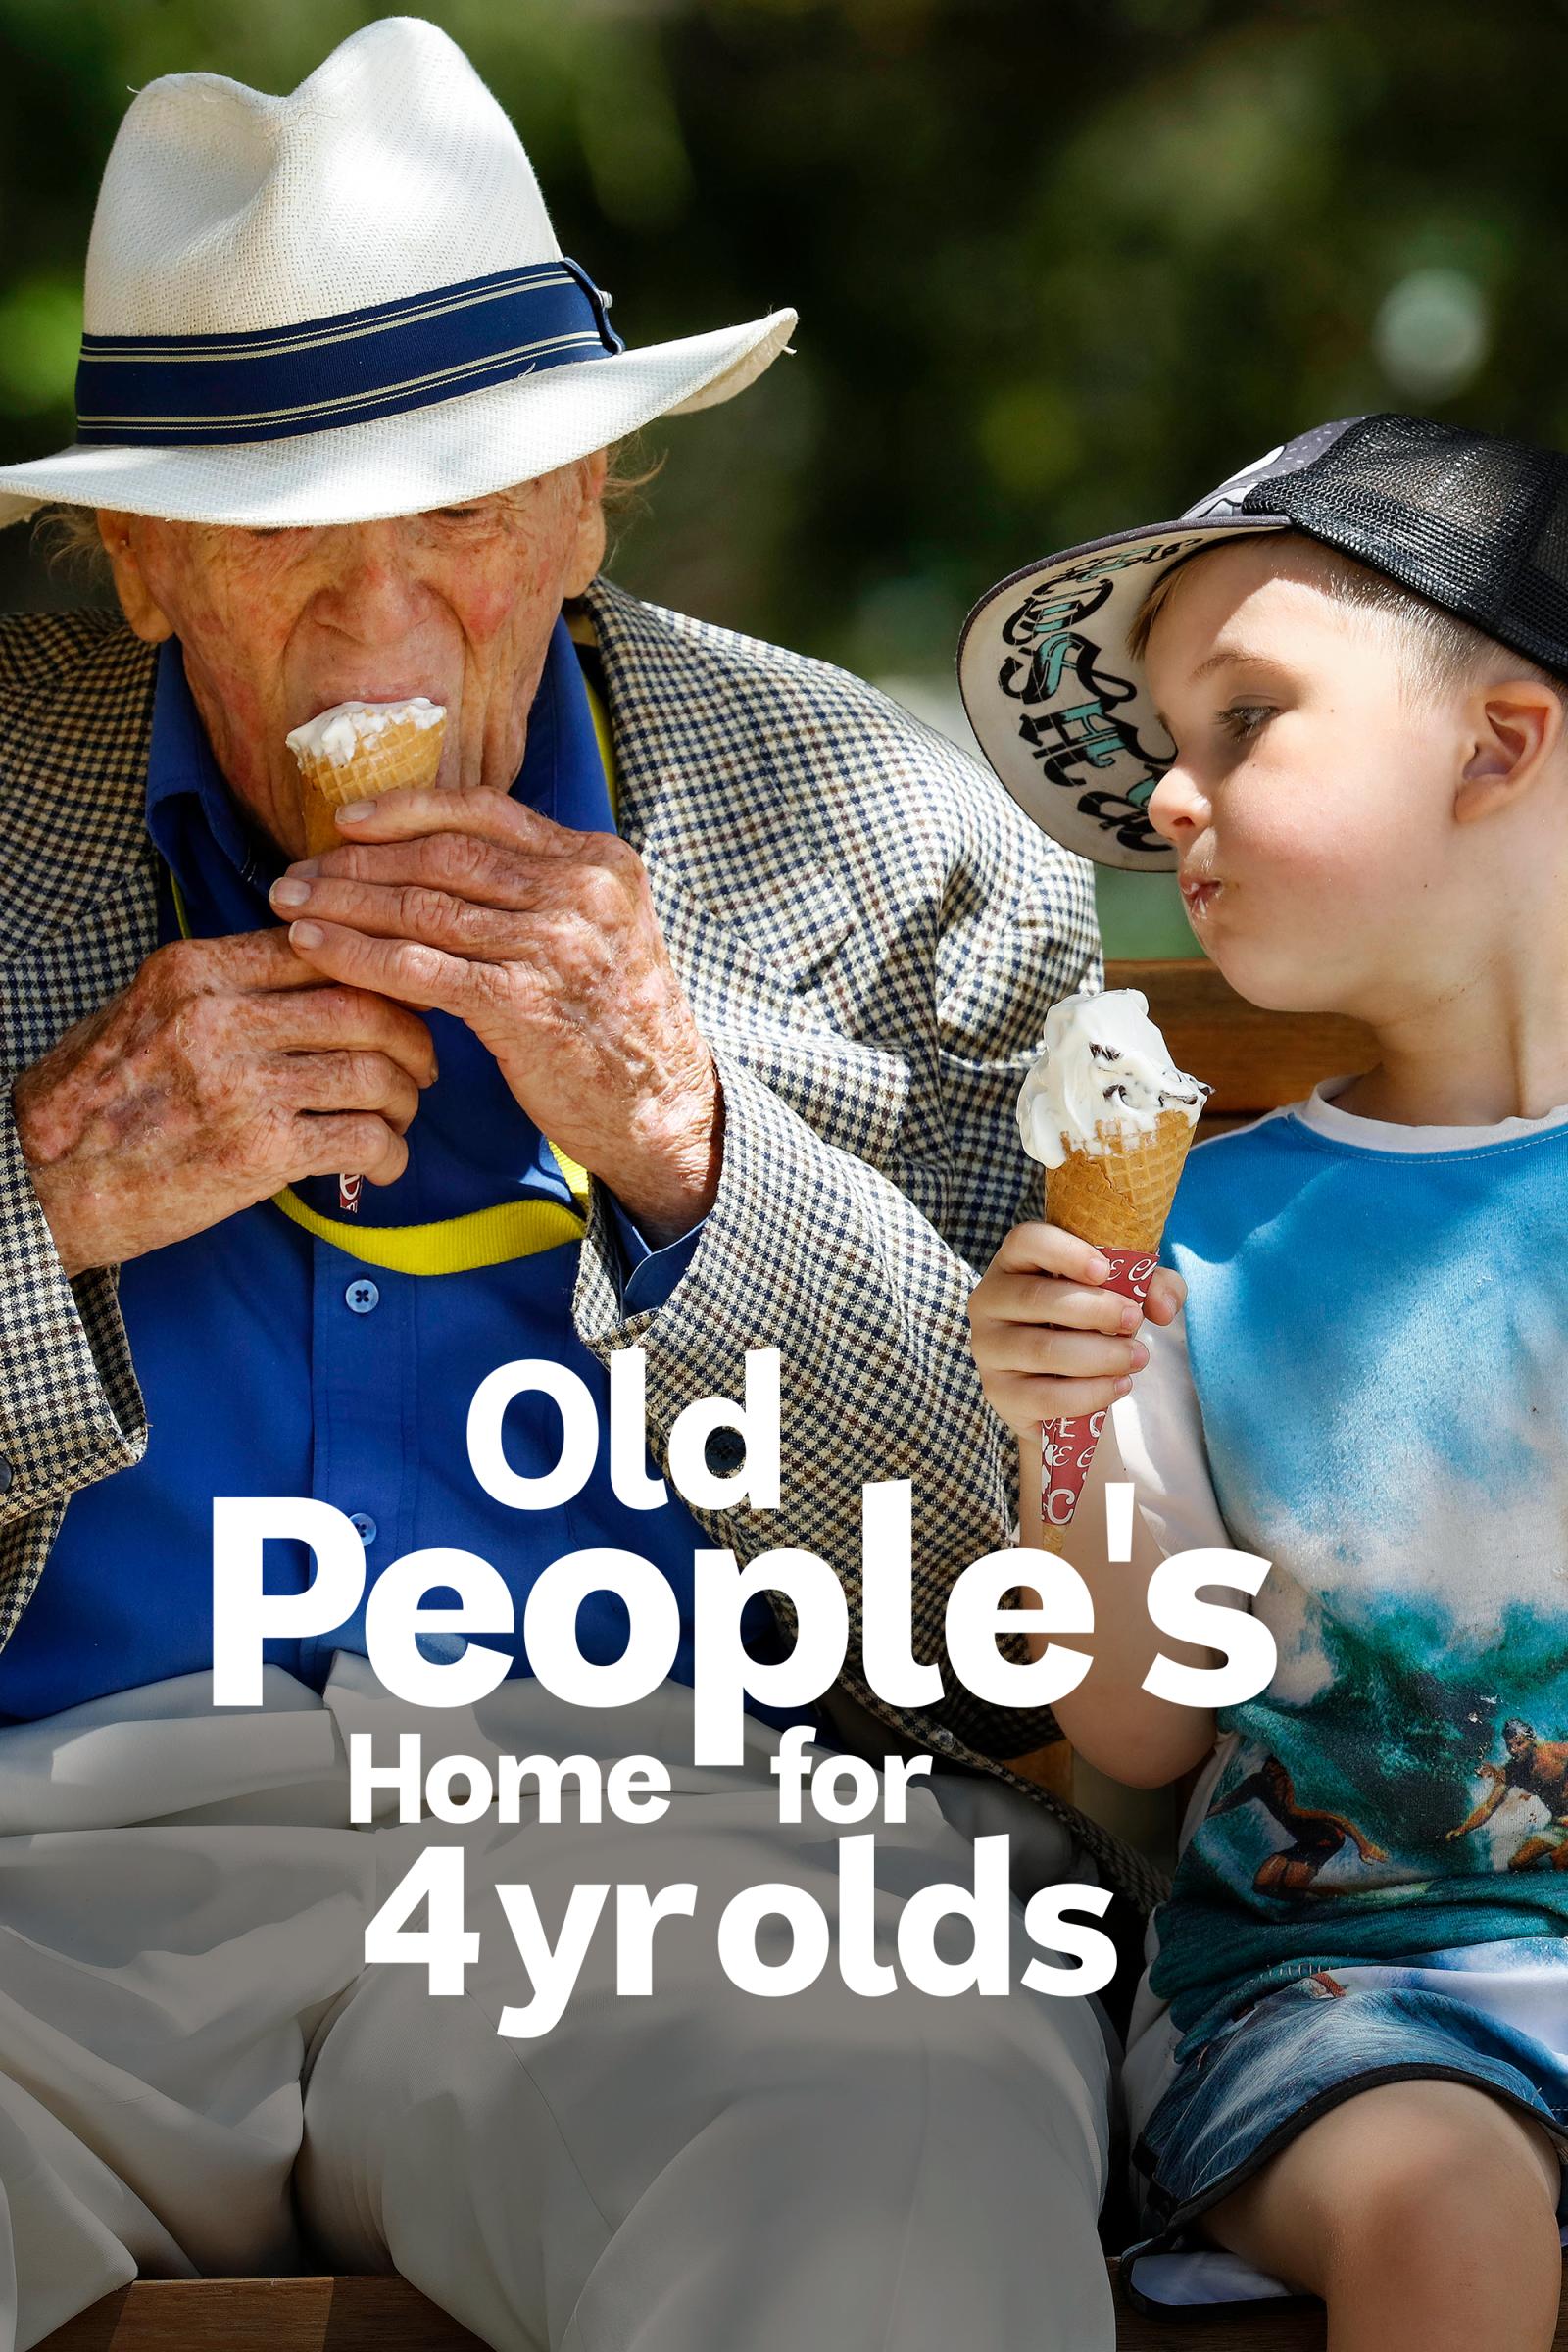 Where to stream Old People's Home for 4 Year Old's